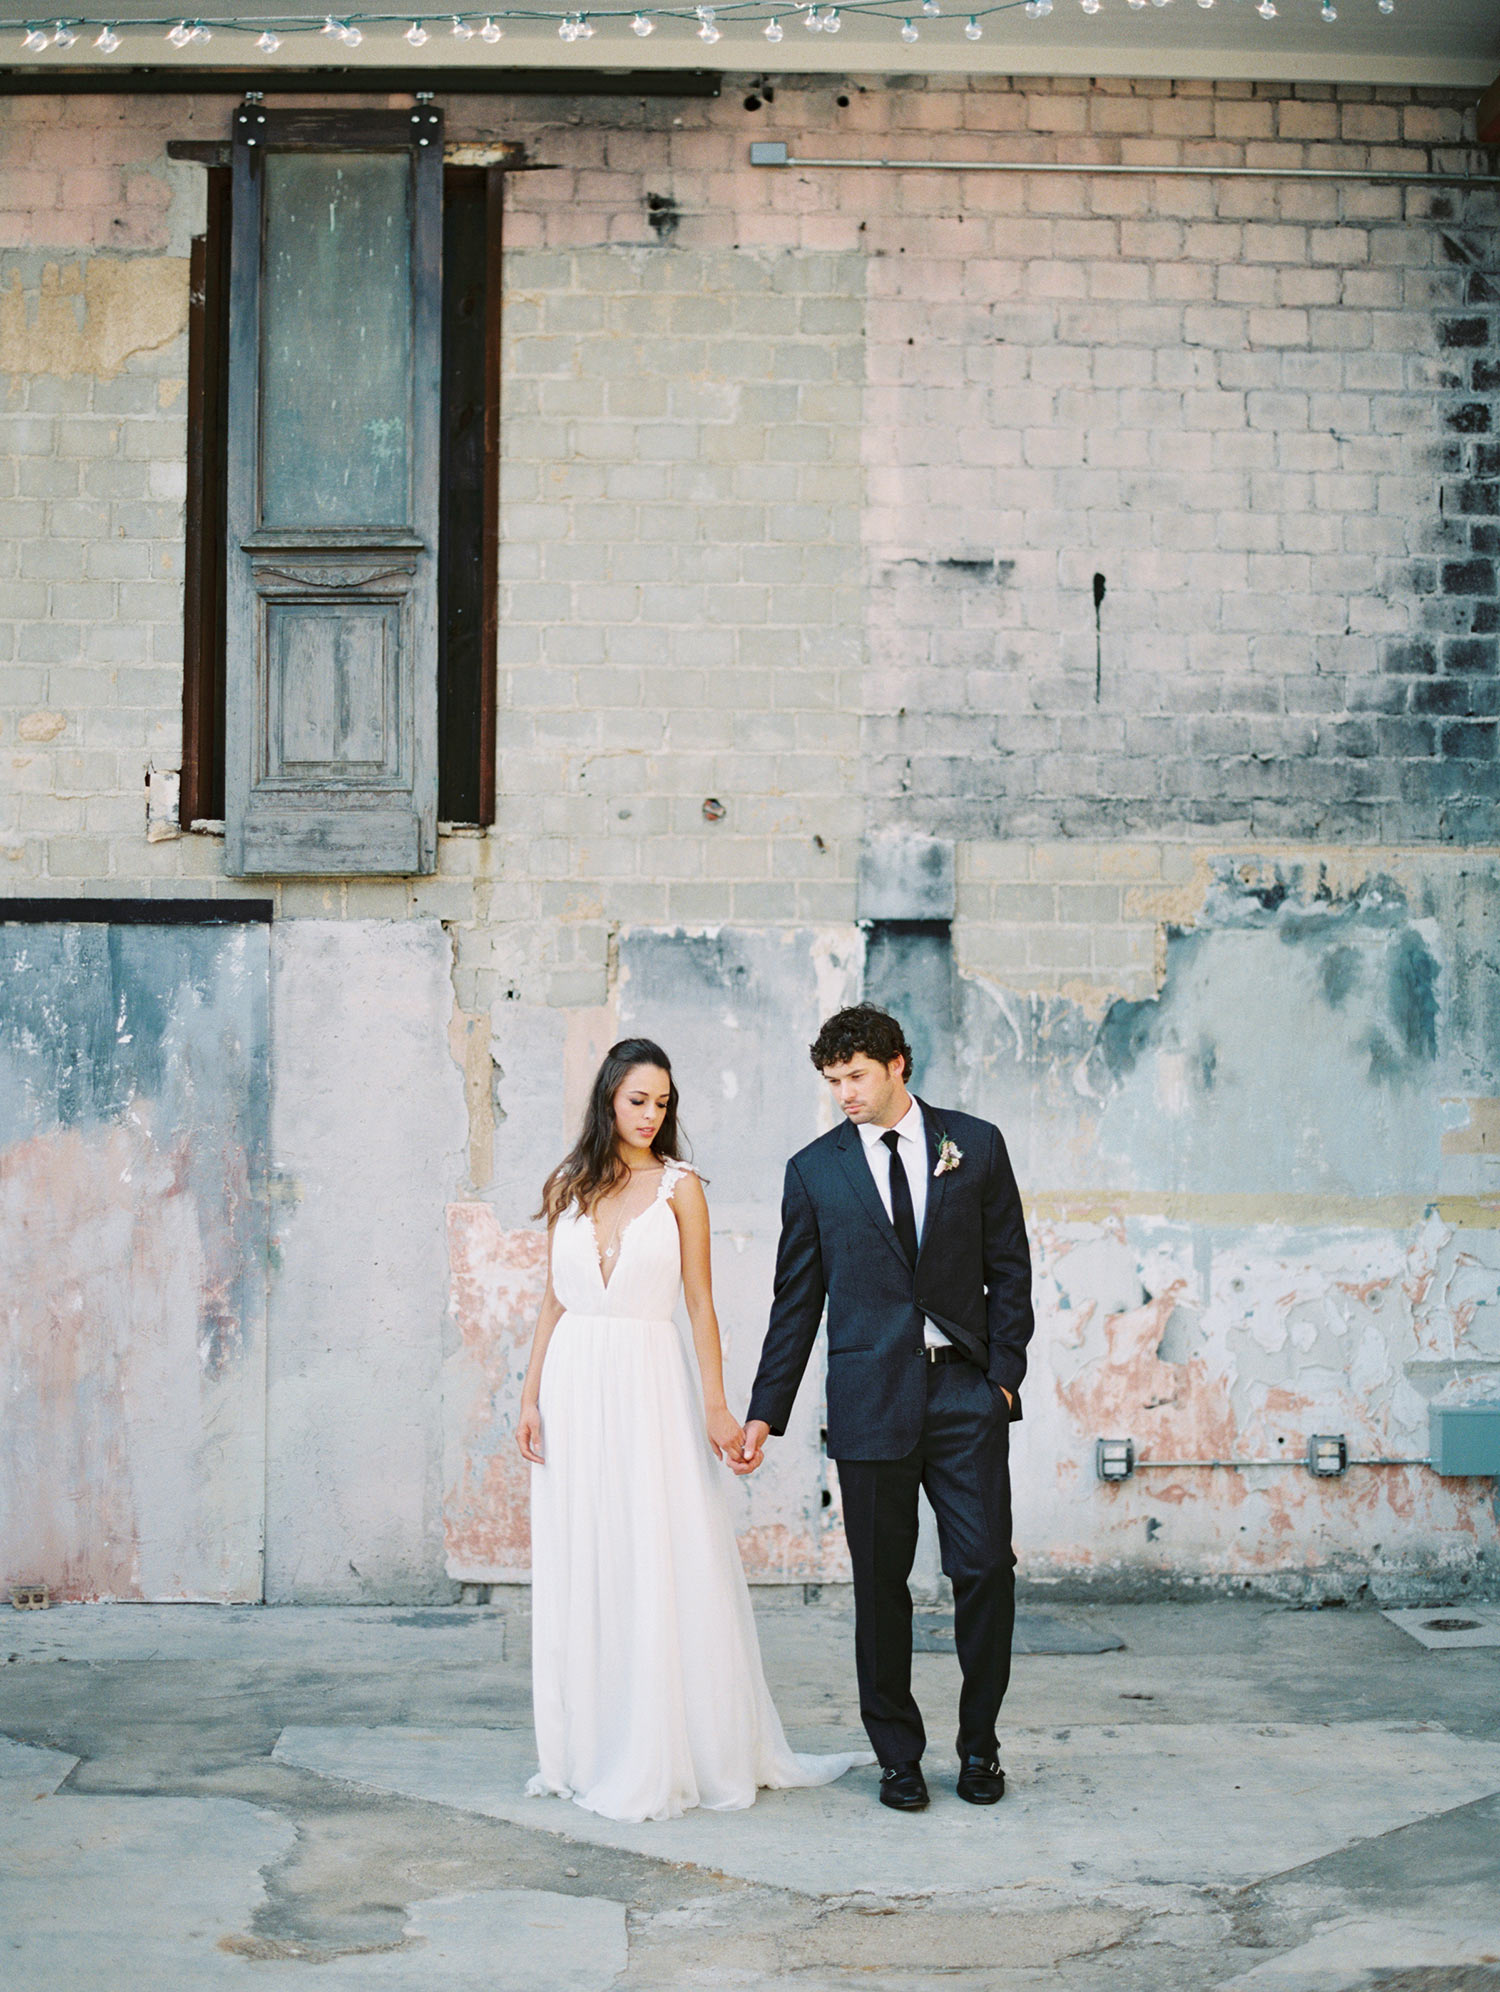 Bride and groom at Post River East in Fort Worth